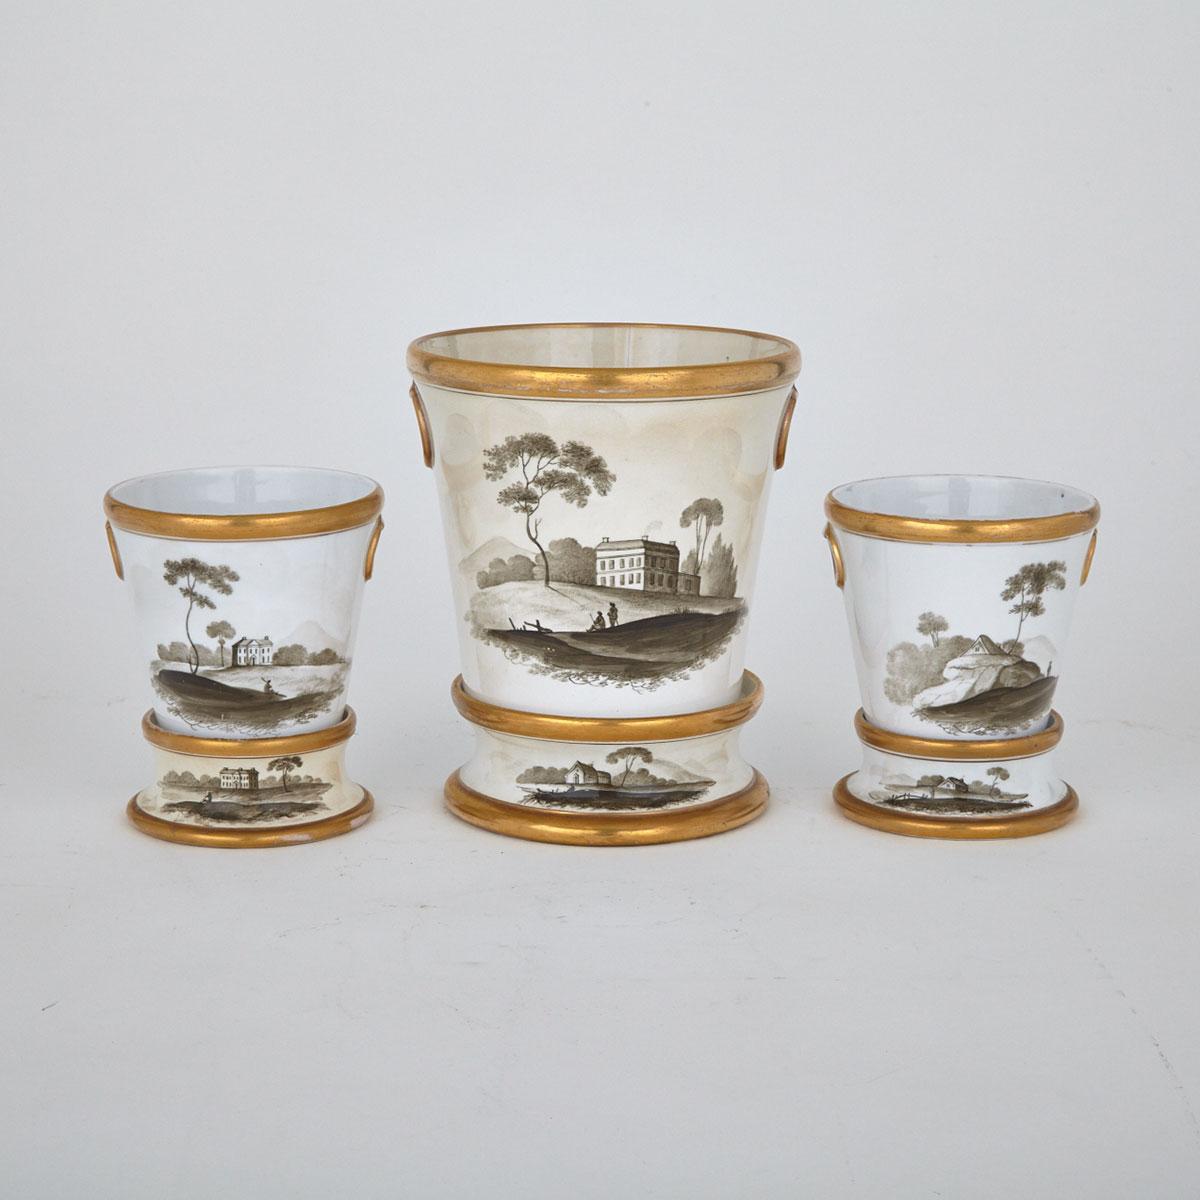 Garniture of Three Spode Cachepots with Stands, early 19th century